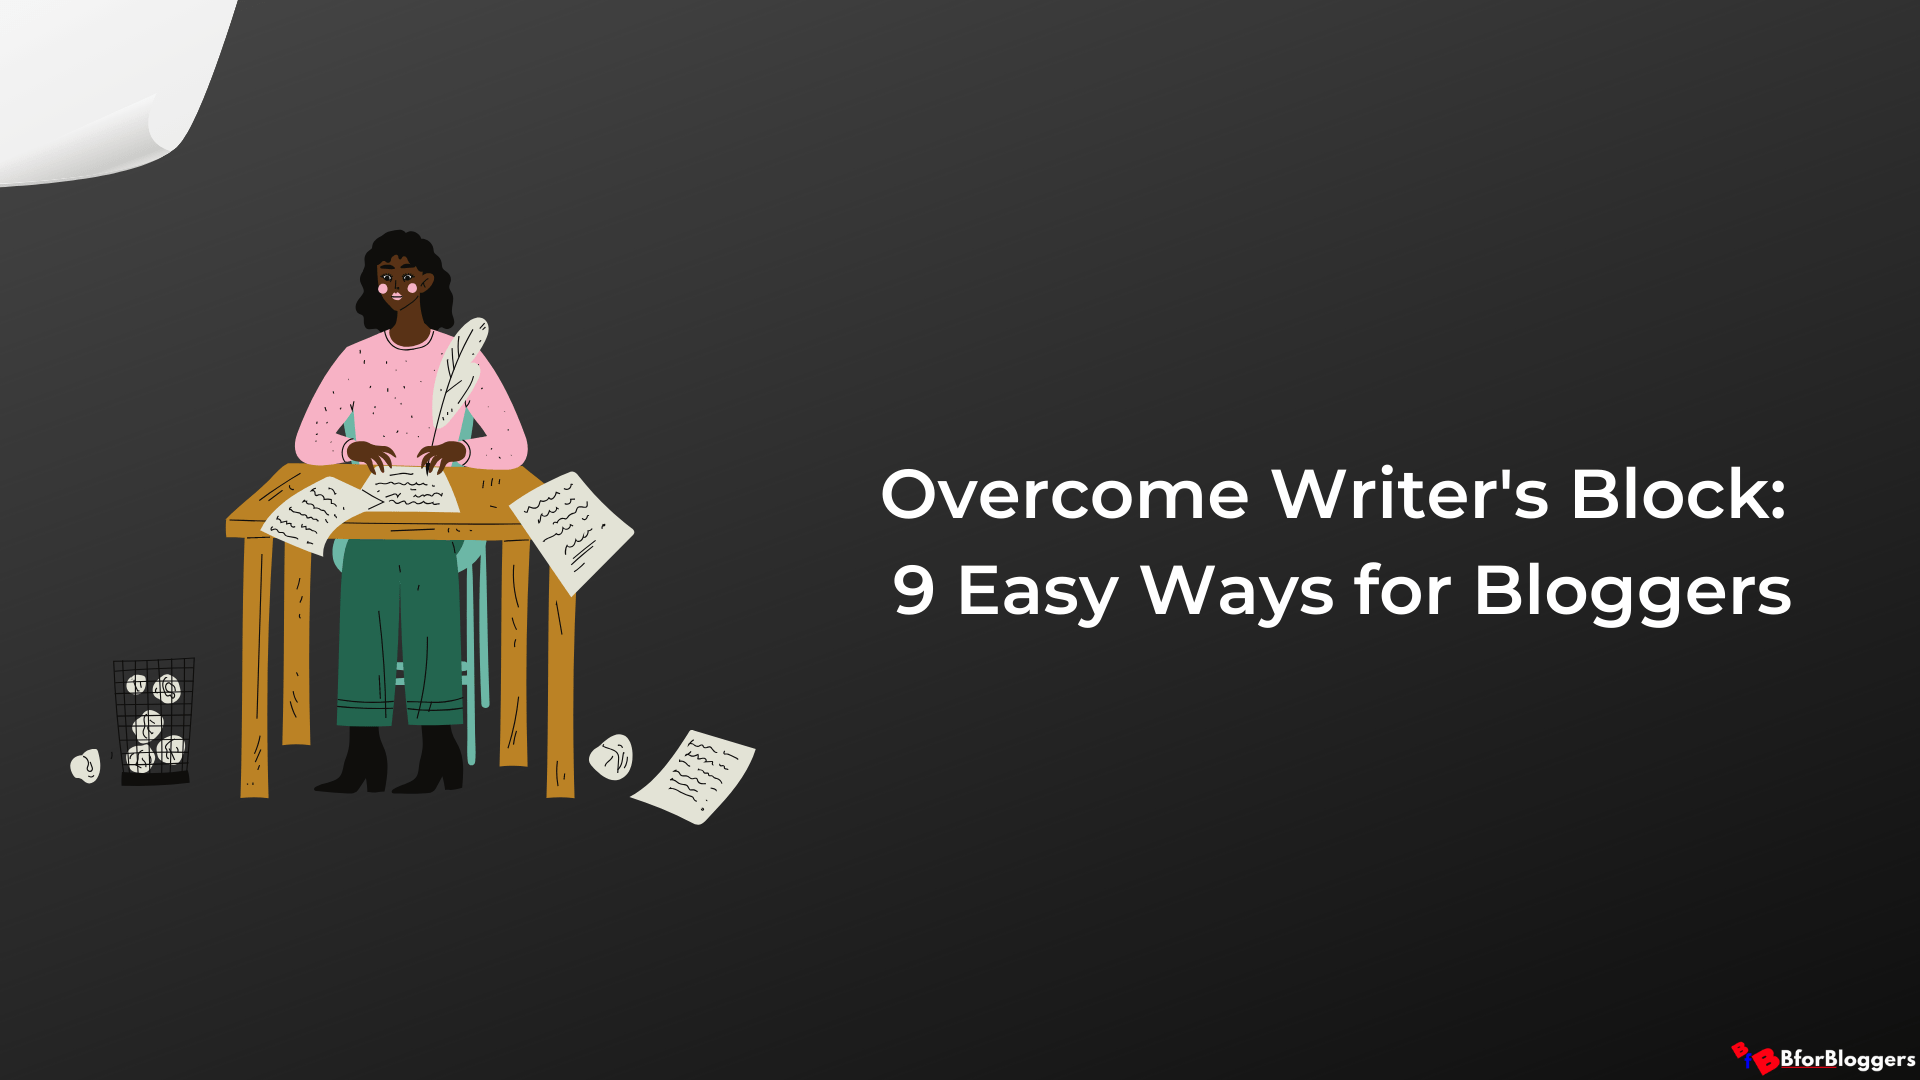 Overcome Writer’s Block: 9 Ways to Get Past a Blinking Cursor